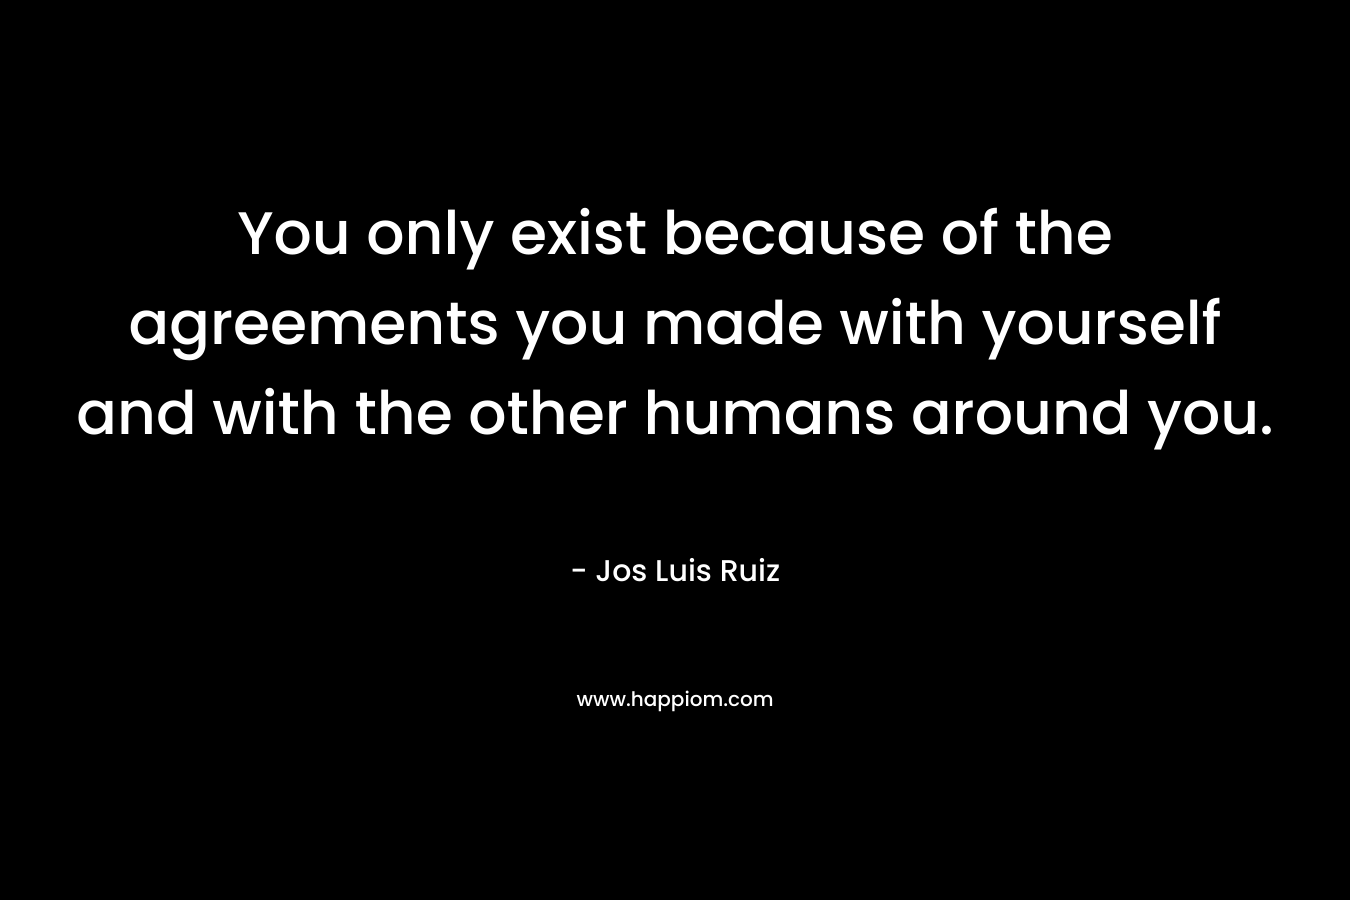 You only exist because of the agreements you made with yourself and with the other humans around you.